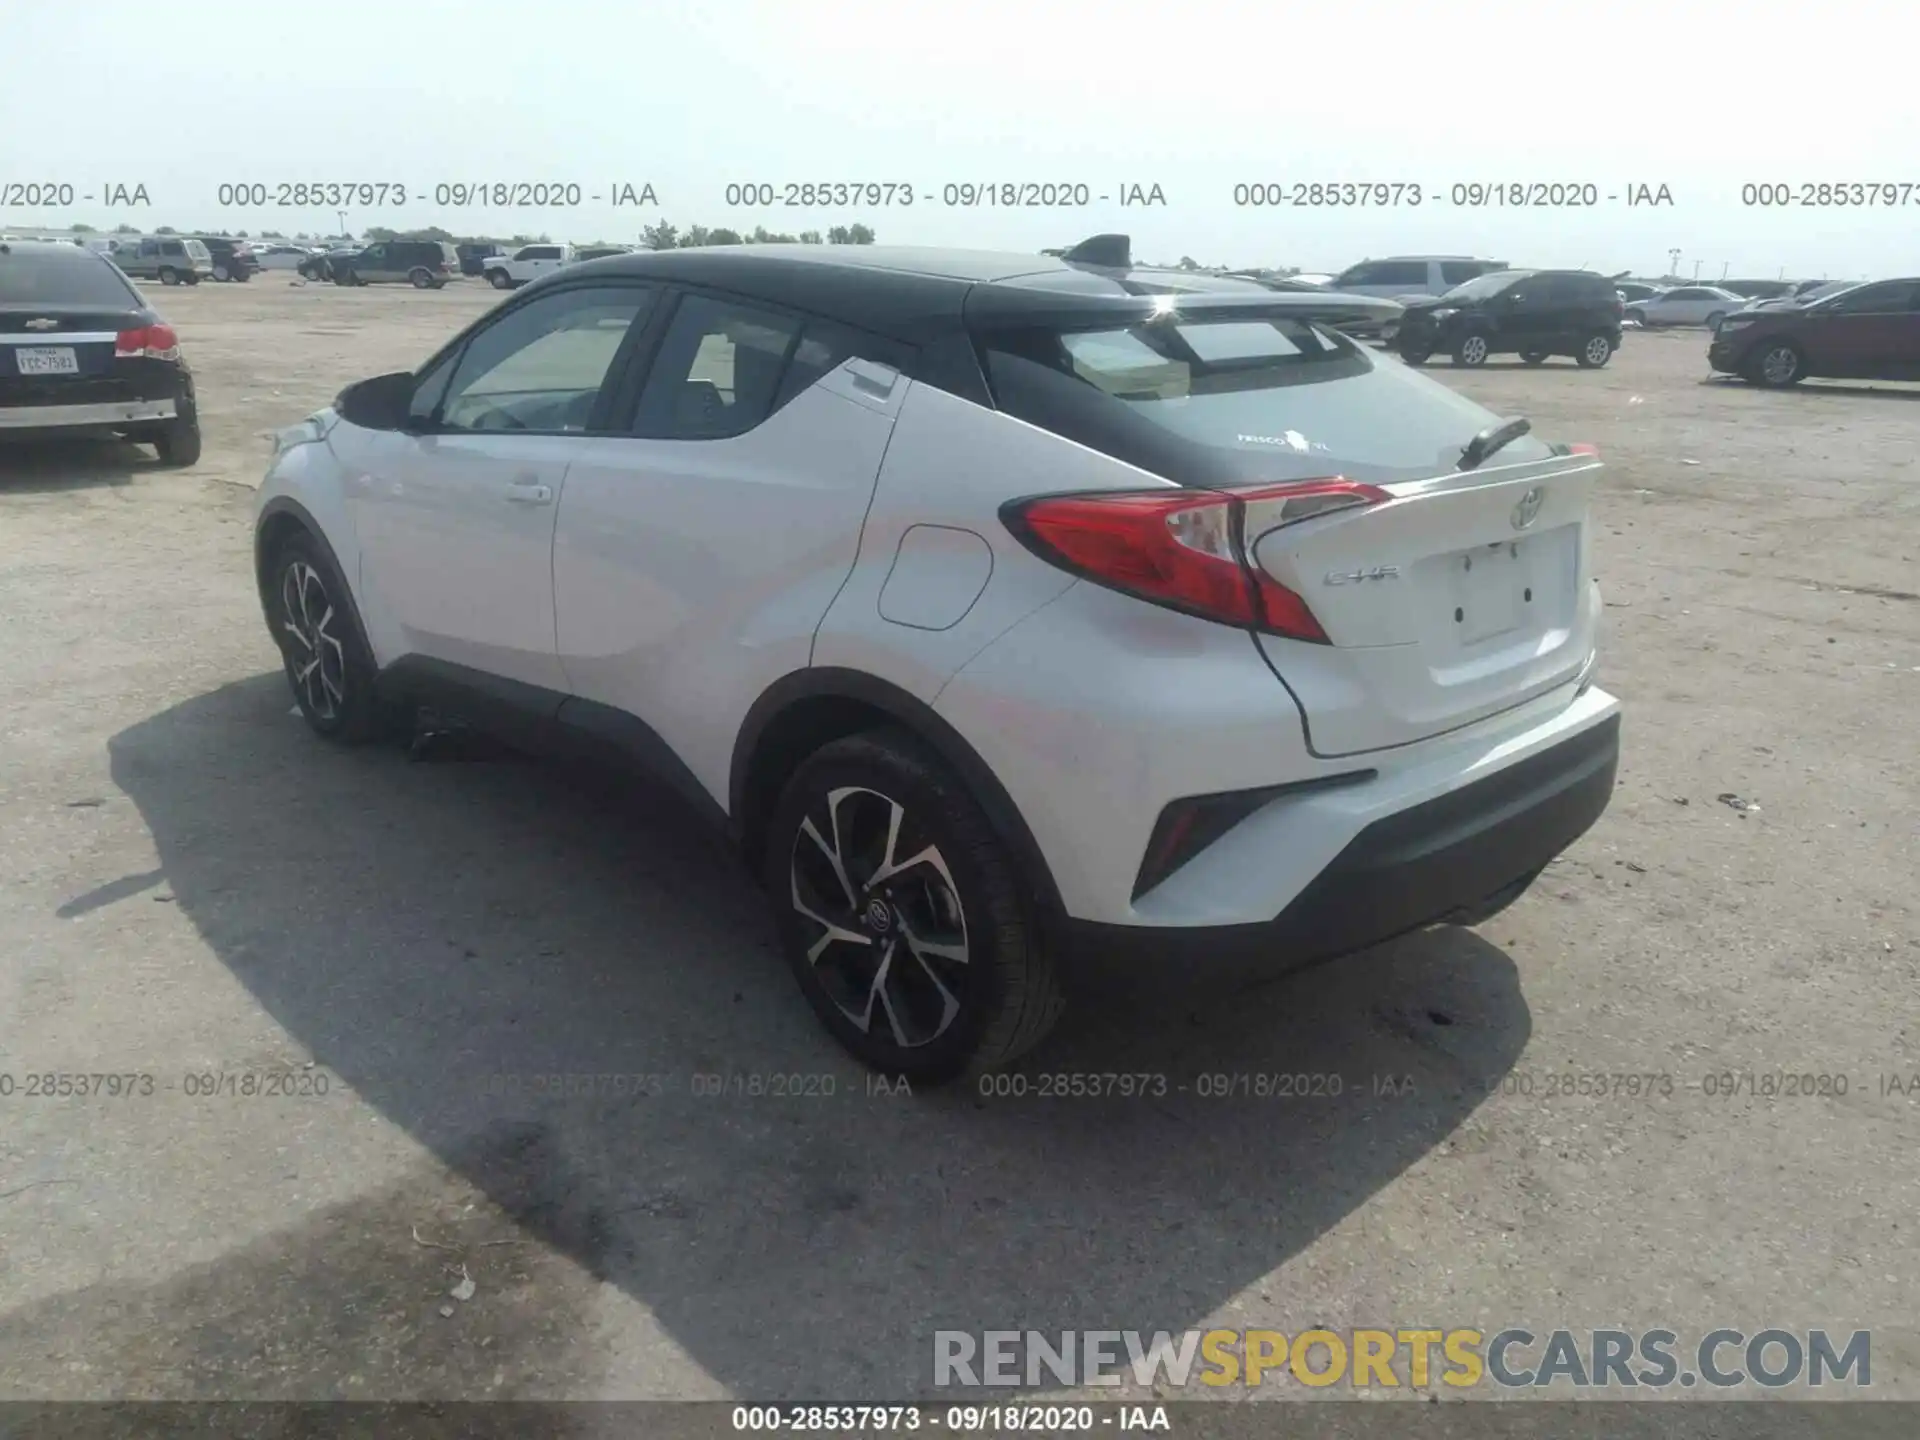 3 Photograph of a damaged car NMTKHMBXXKR085298 TOYOTA C-HR 2019